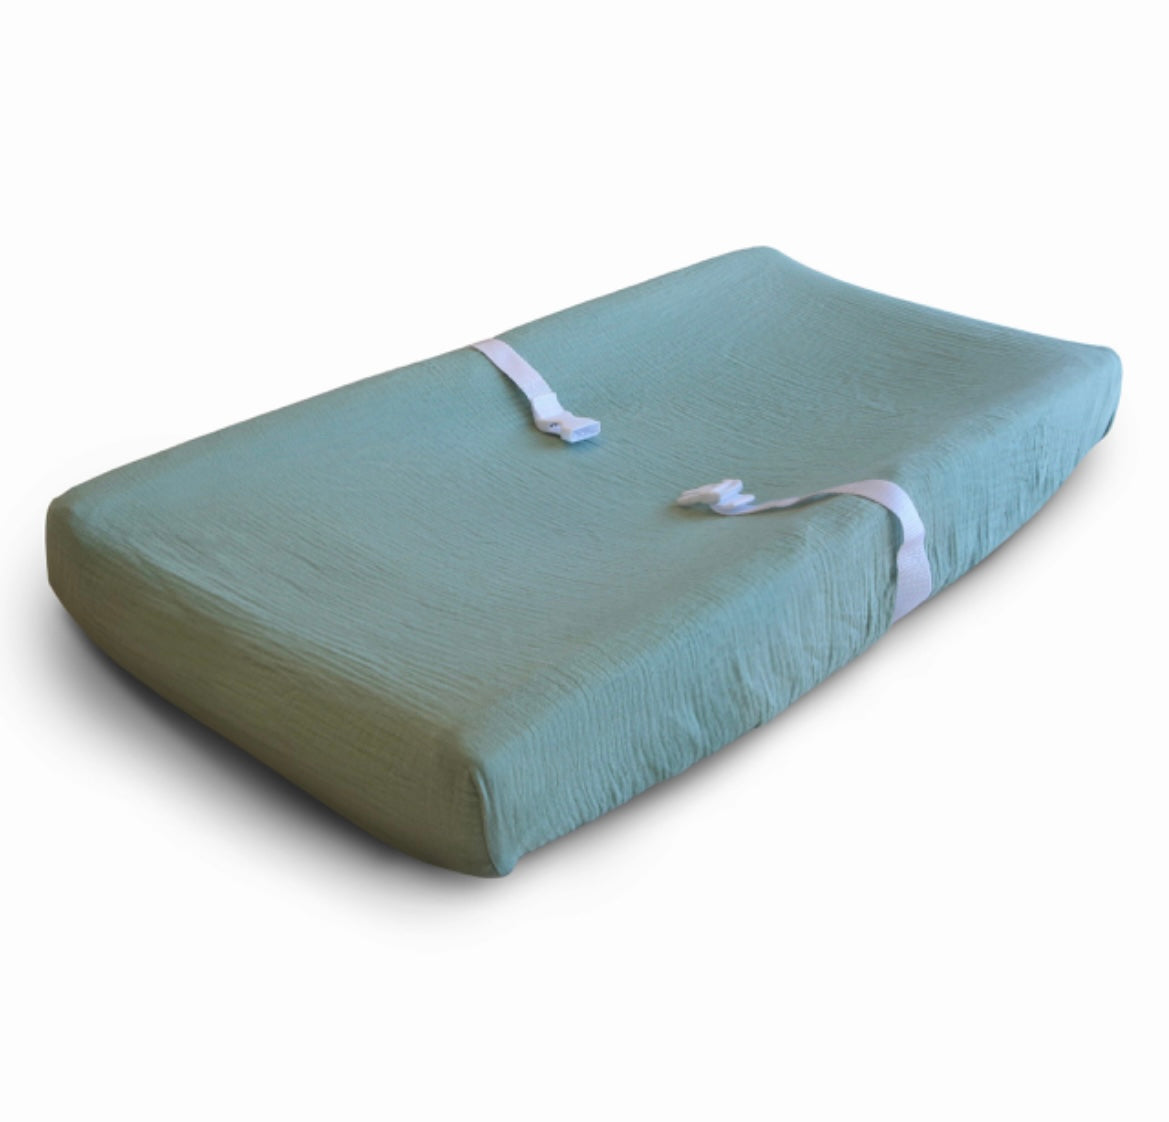 Extra Soft Muslin Changing Pad Cover || 3 Variations